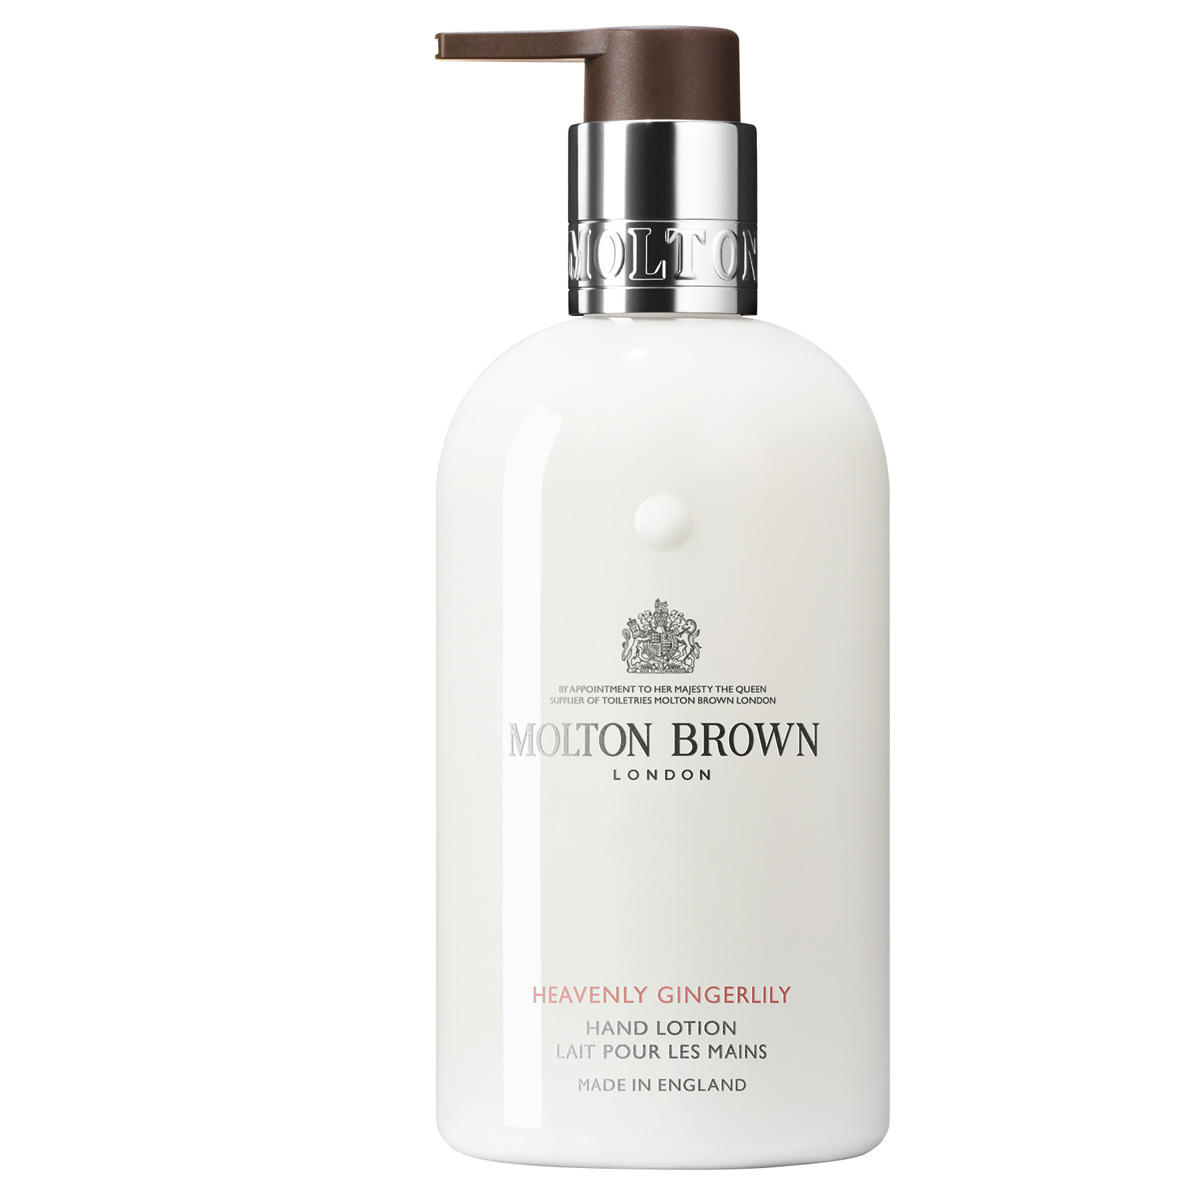 MOLTON BROWN Heavenly Gingerlily Hand Lotion 300 ml - 1